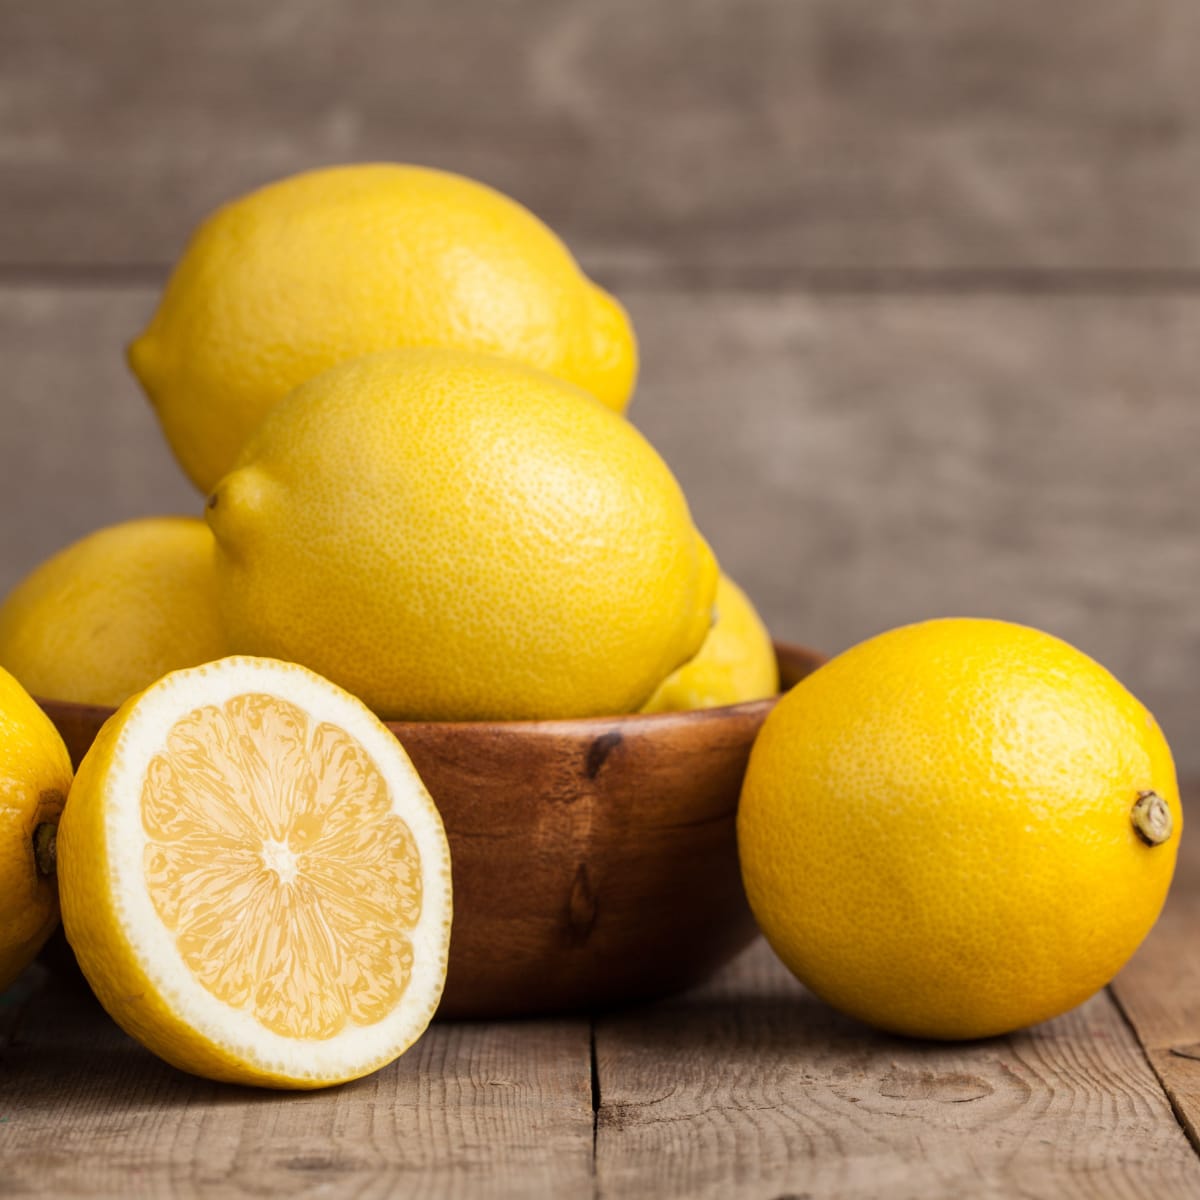 Ripe Lemons on a Wooden Bowl Placed on Top of a Dark Brown Wooden Table
